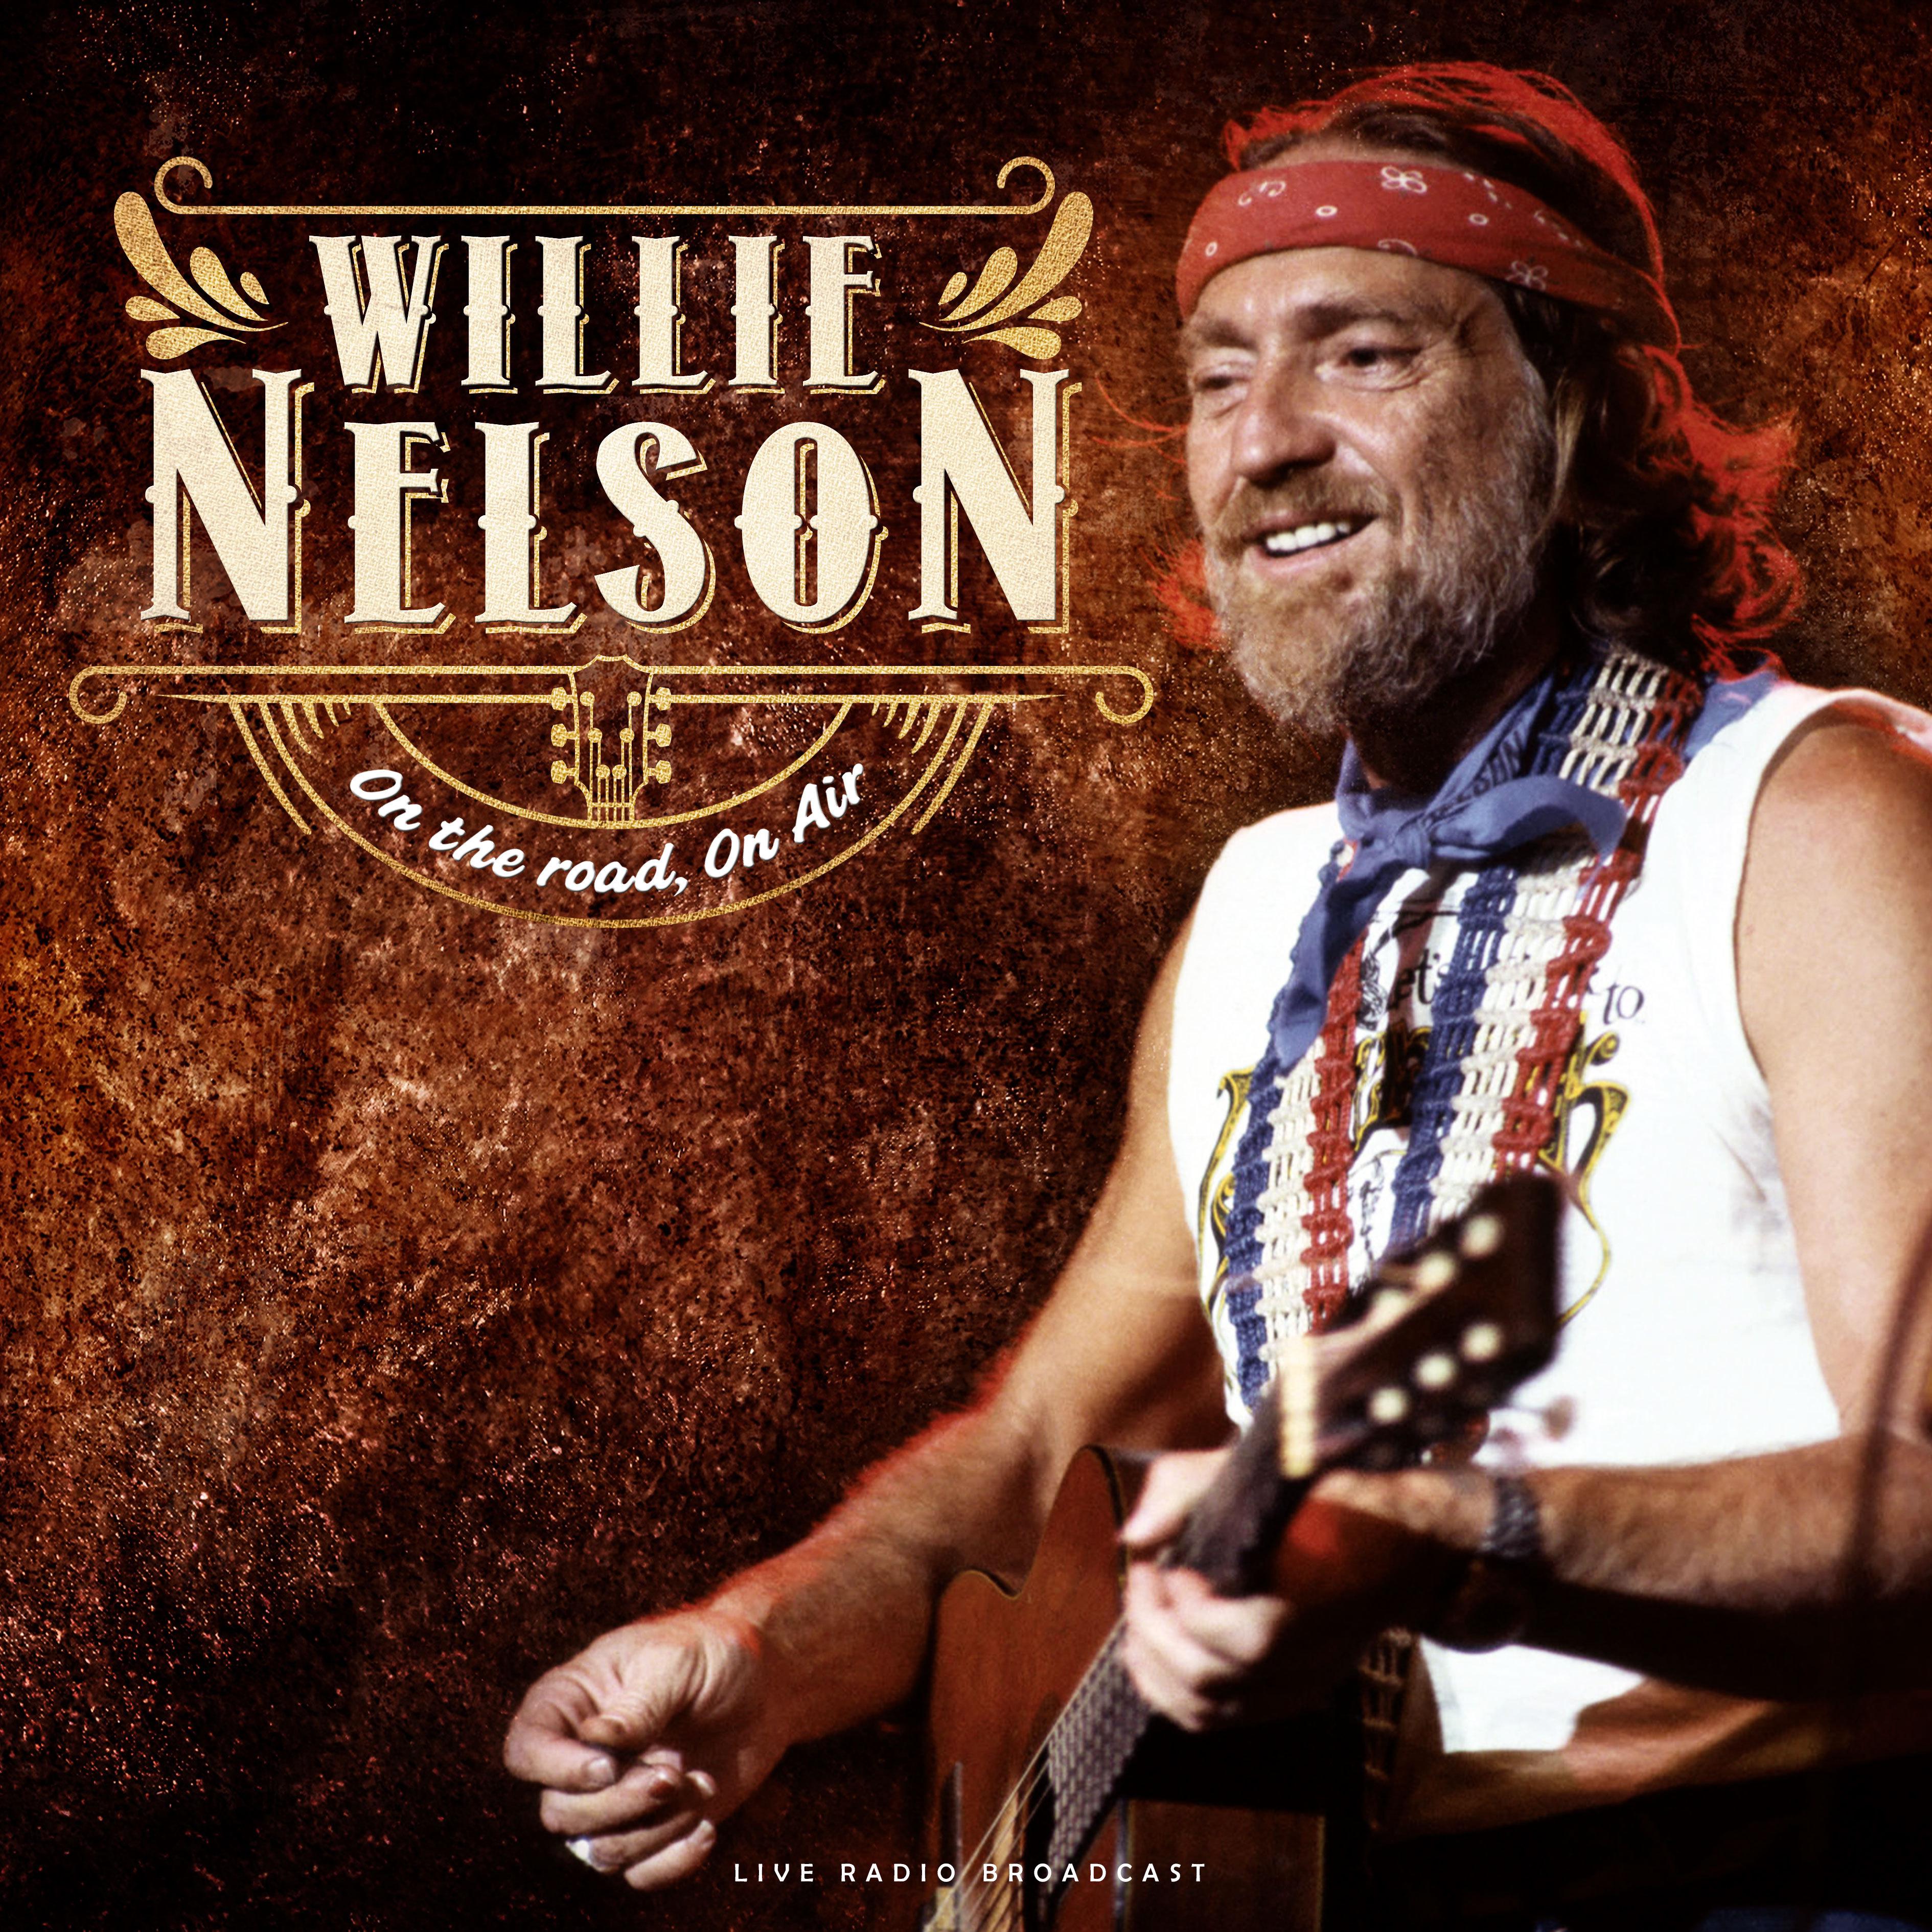 Willie Nelson - On The Road Again (live)